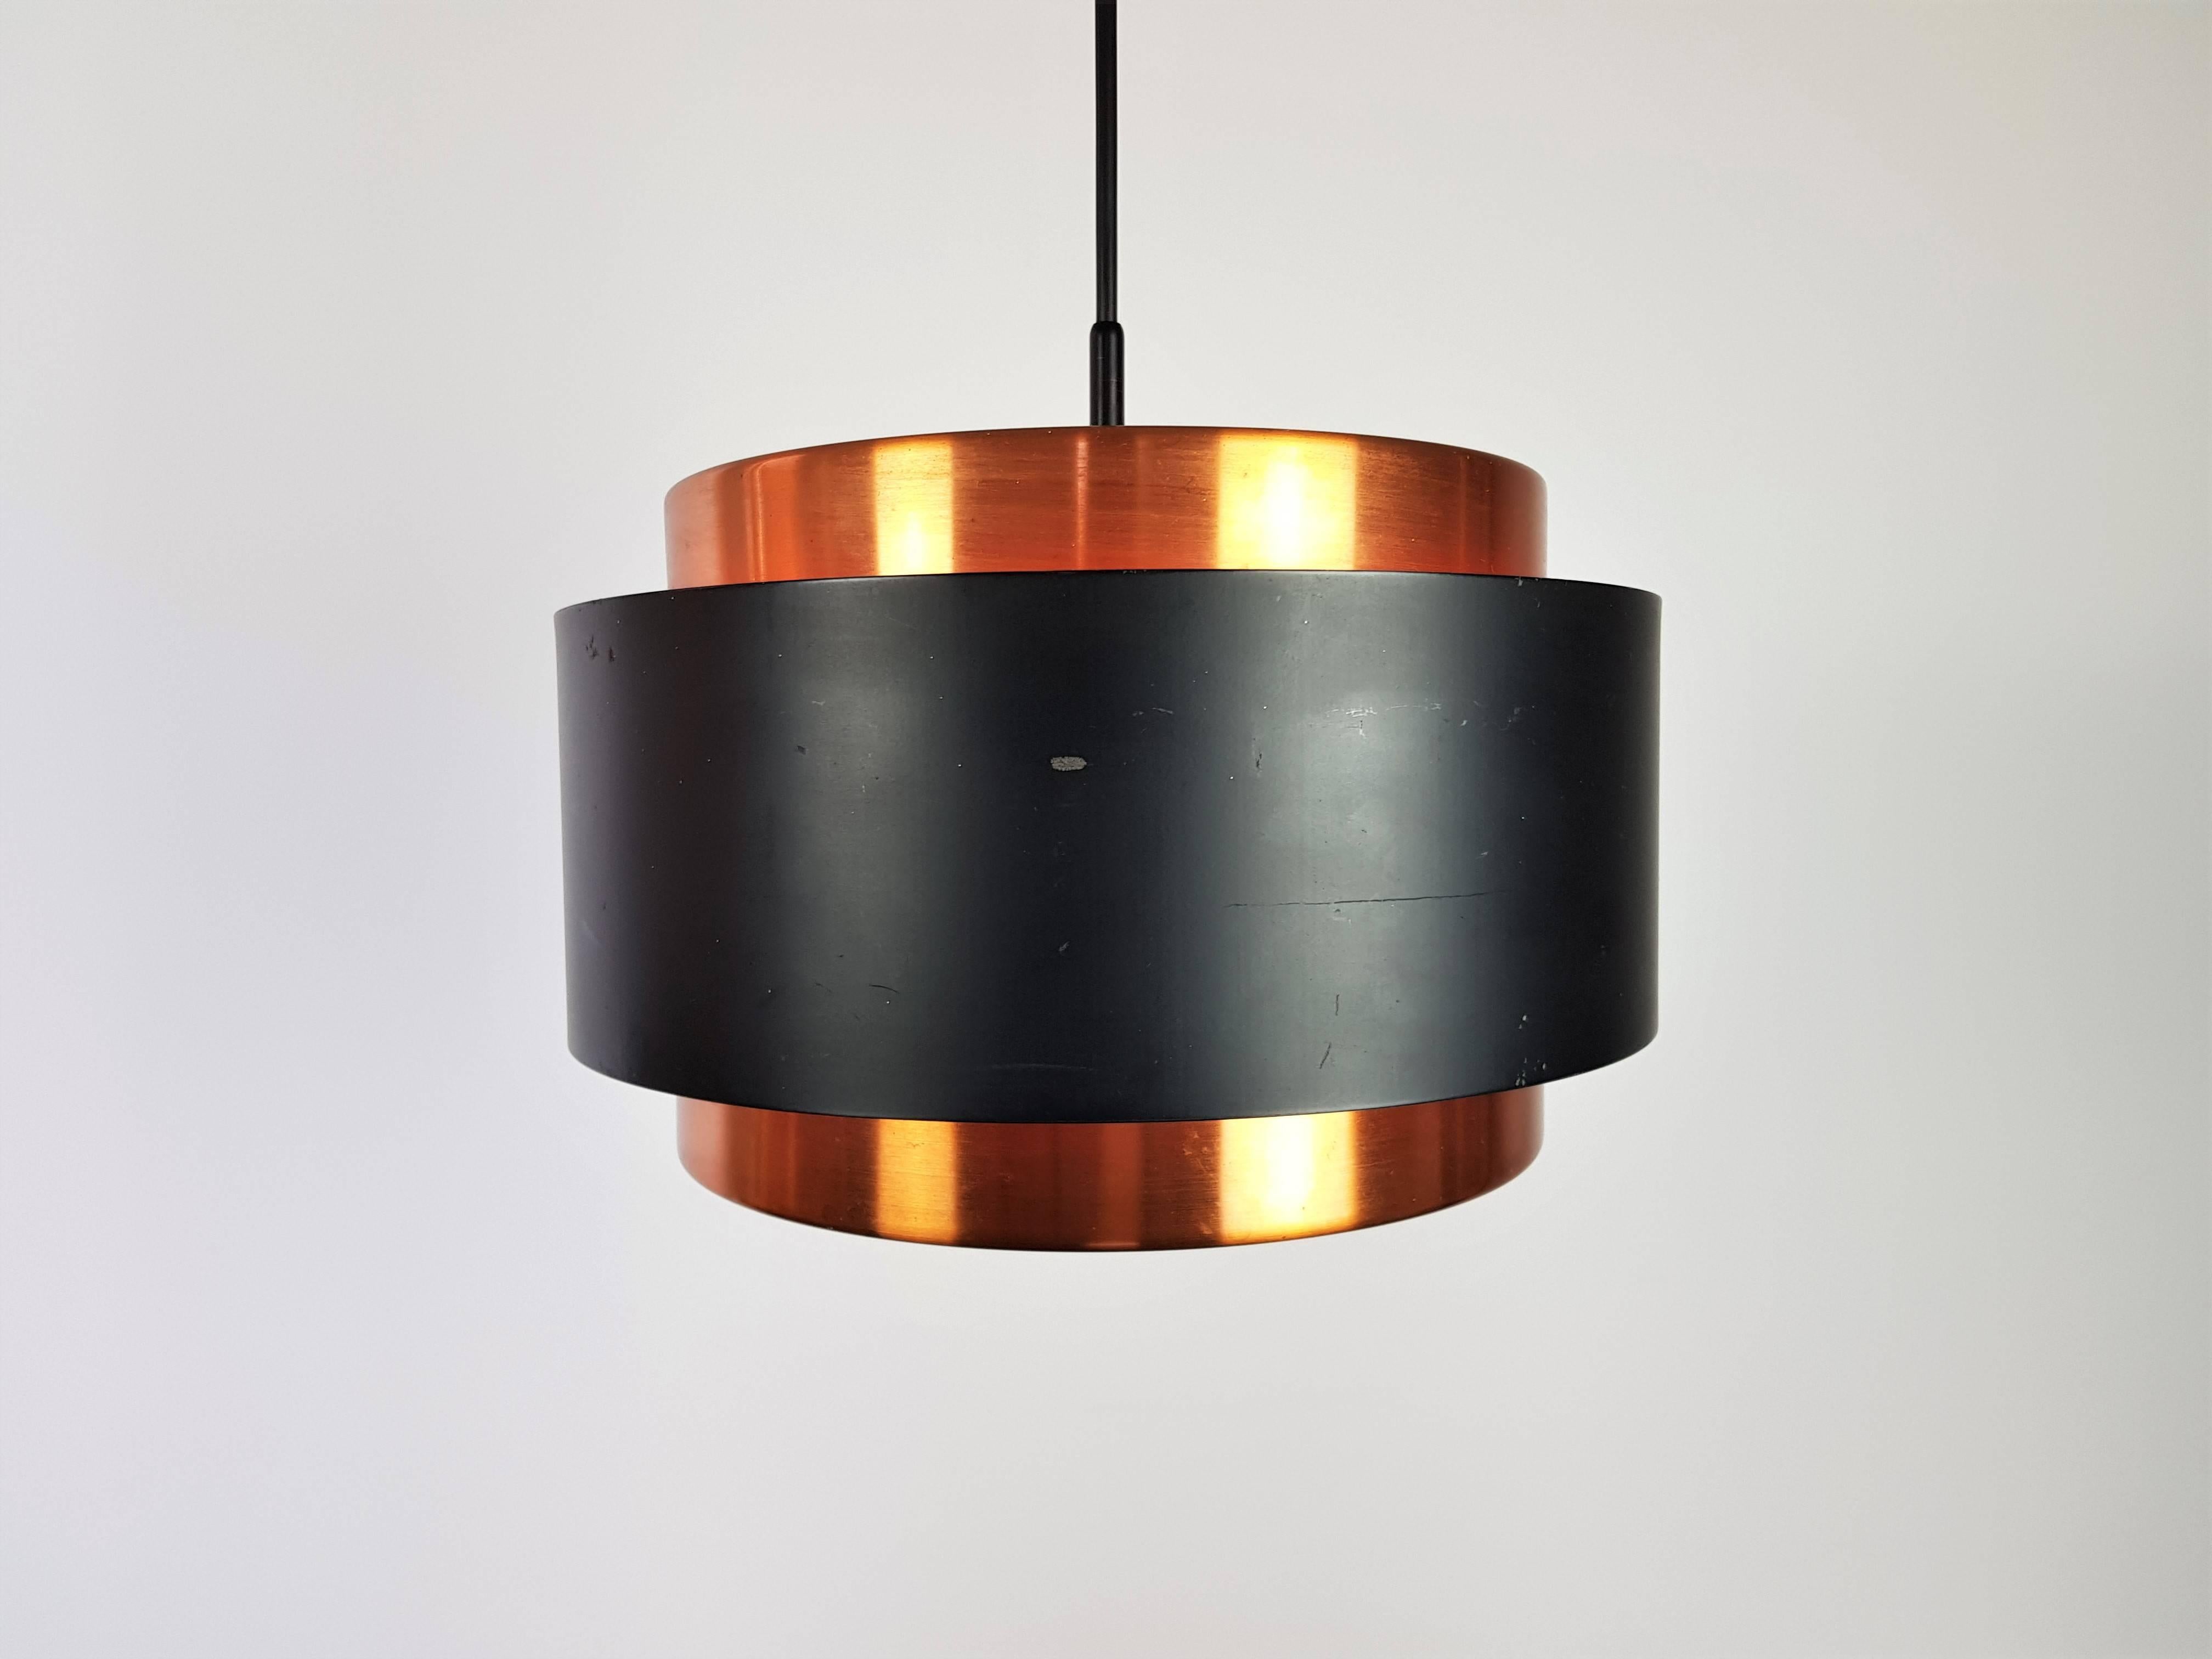 A copper Jo Hammerborg Classic Saturn pendant for Fog & Mørup Denmark.

The Classic Saturn was one of Jo Hammerborg's first designs when he took over as director of design at Fog & Mørup at the end of the 1950s and began the process of transforming